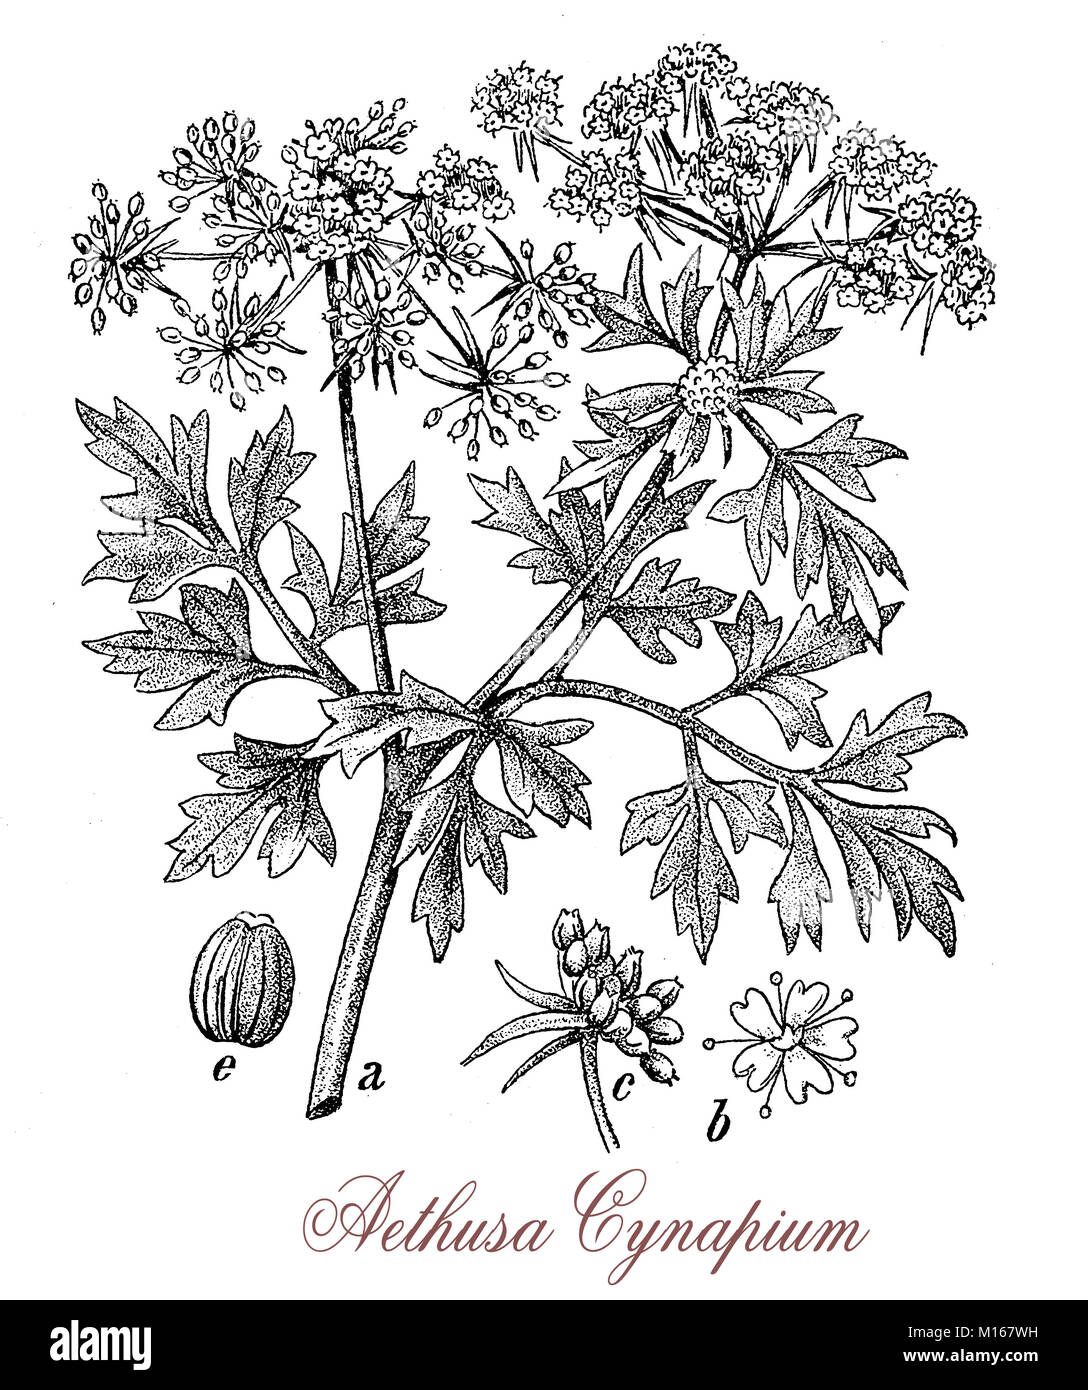 Vintage engraving of Aethusa cynapium or poison parsley, common weed poisonous plant with an unpleasant smell Stock Photo